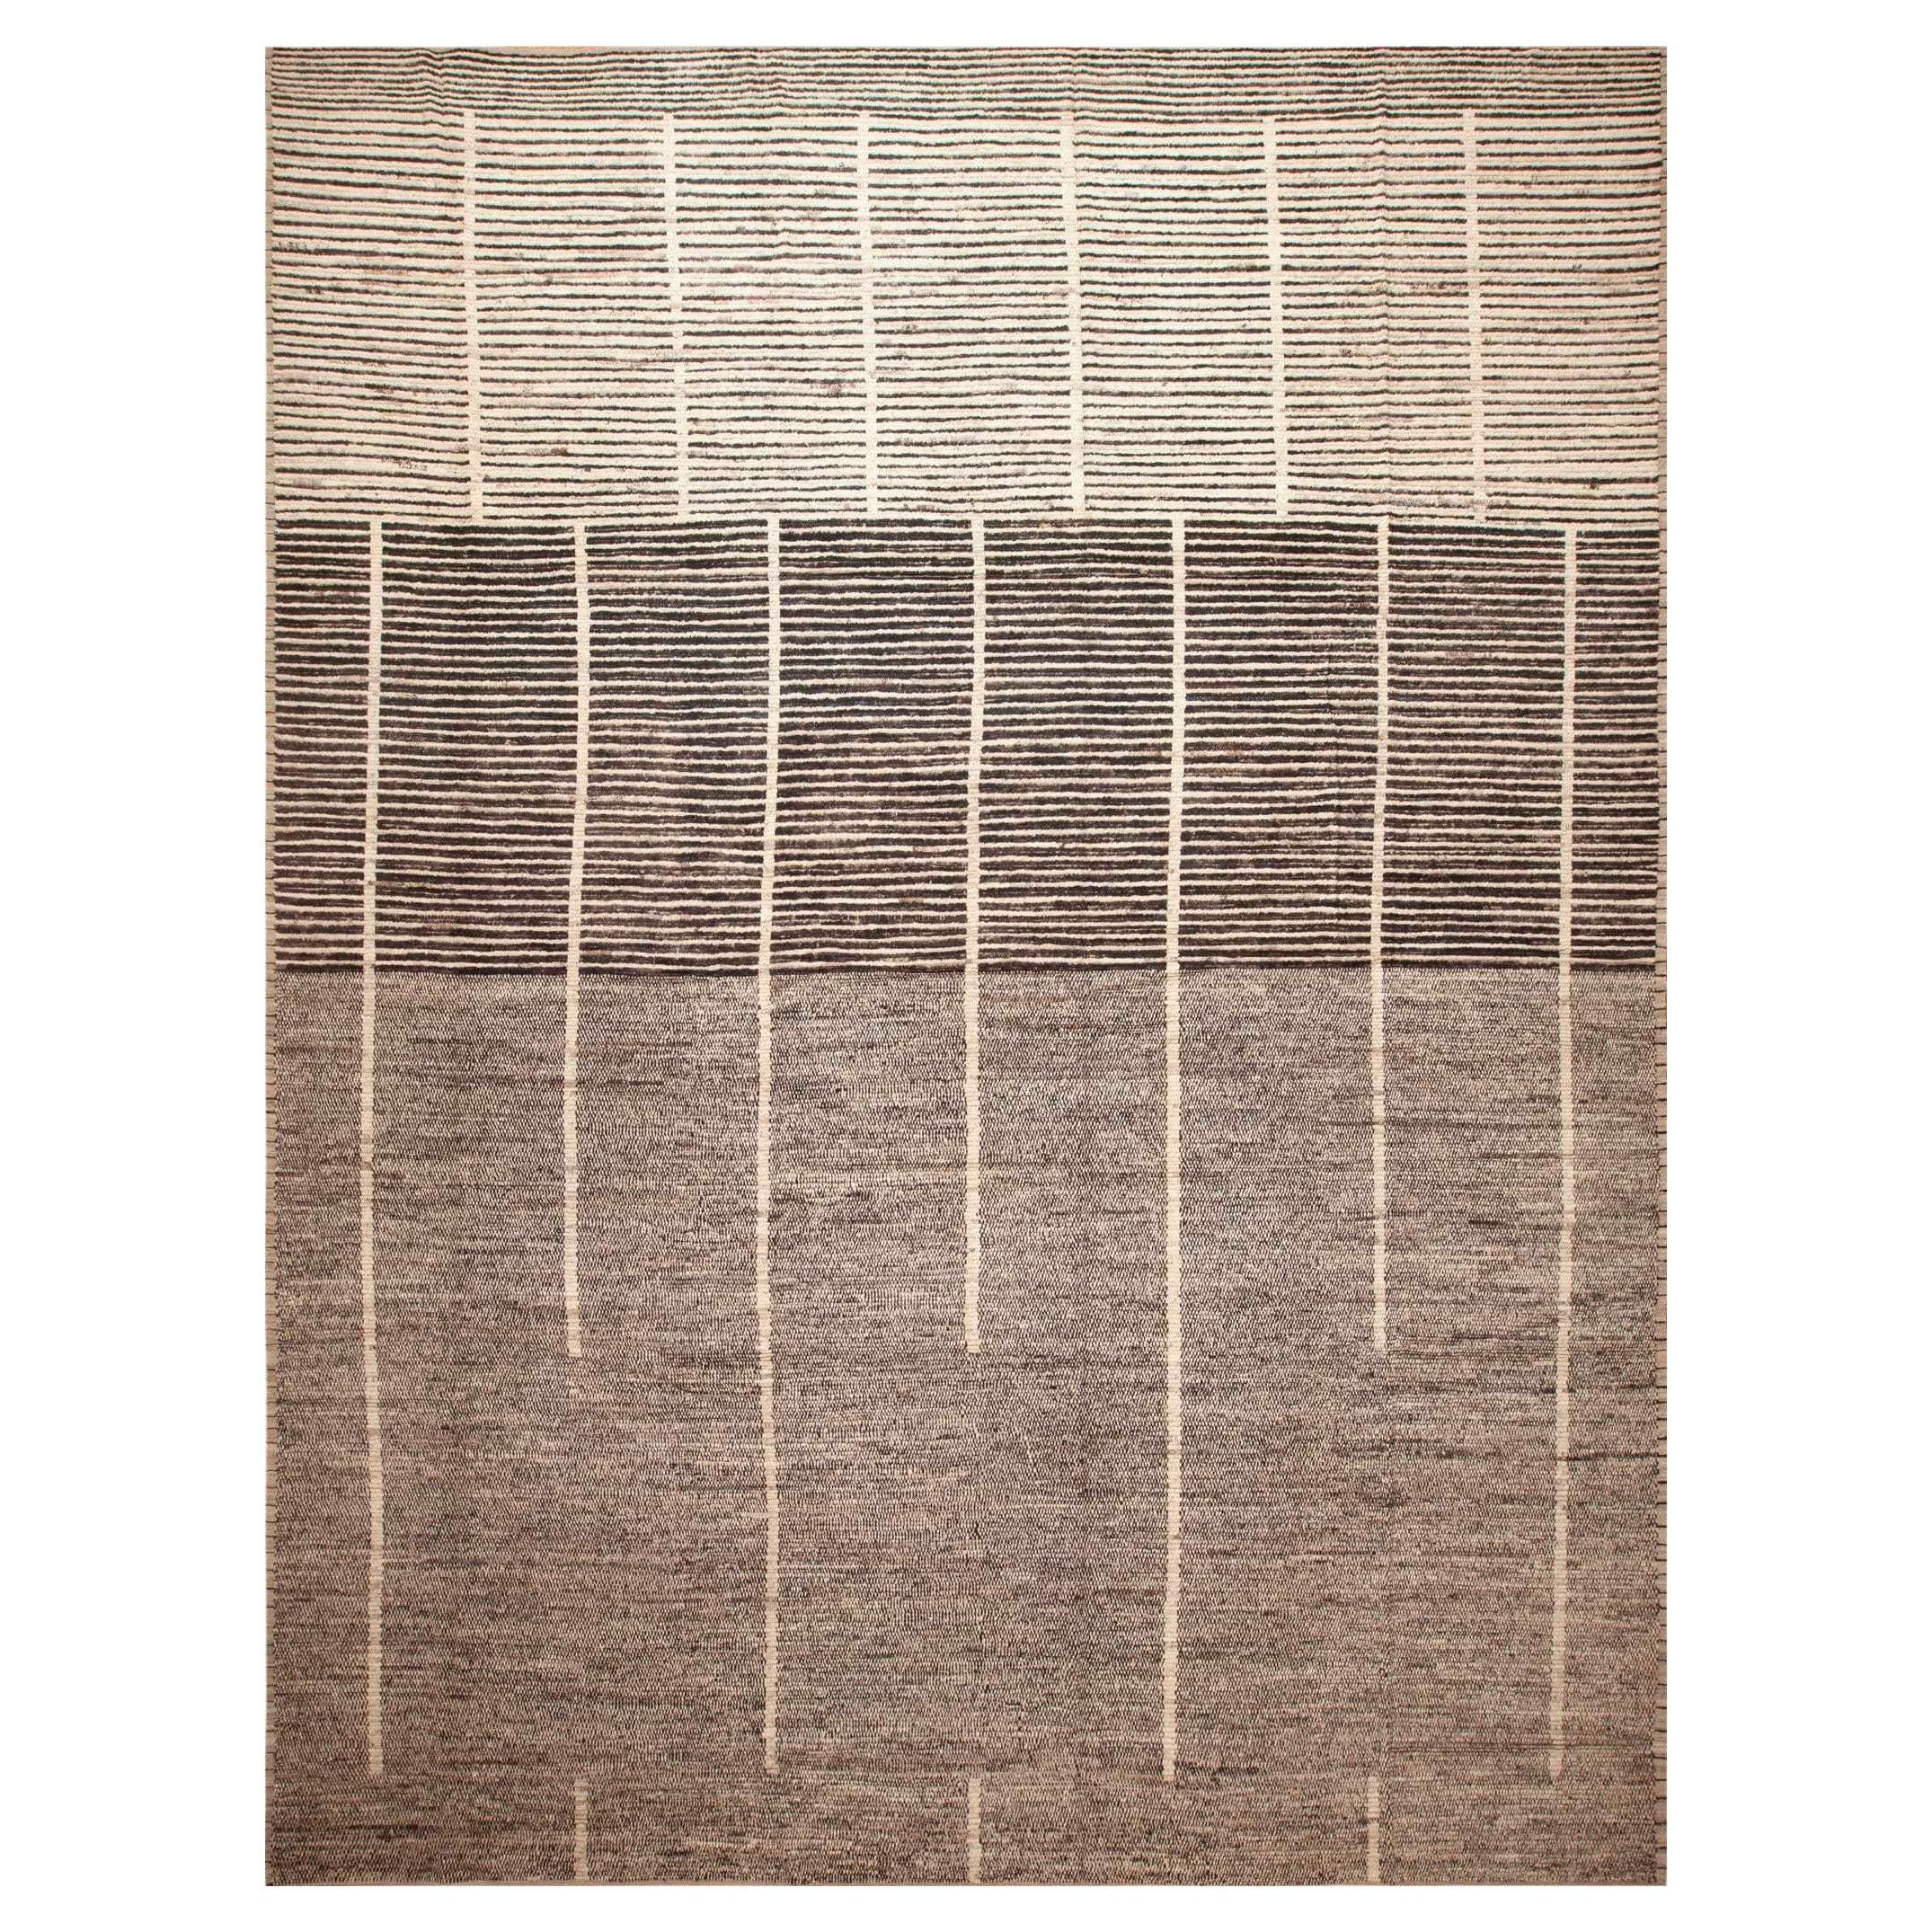 Nazmiyal Collection Large Geometric Design Grey Color Modern Area Rug 14' x 19' For Sale